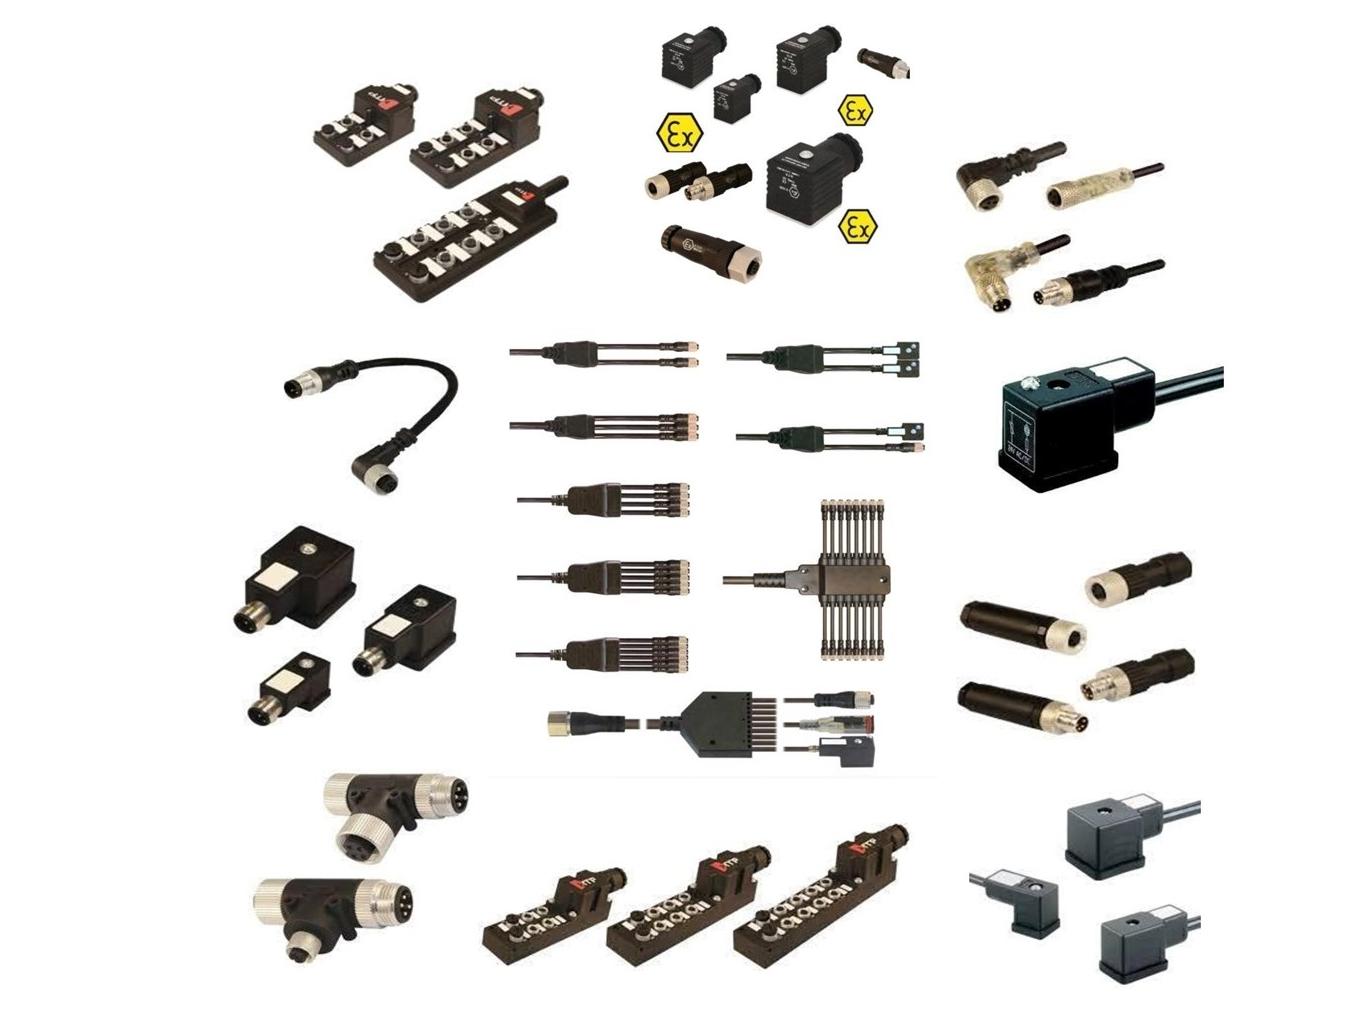 Essential connections with industrial connectors